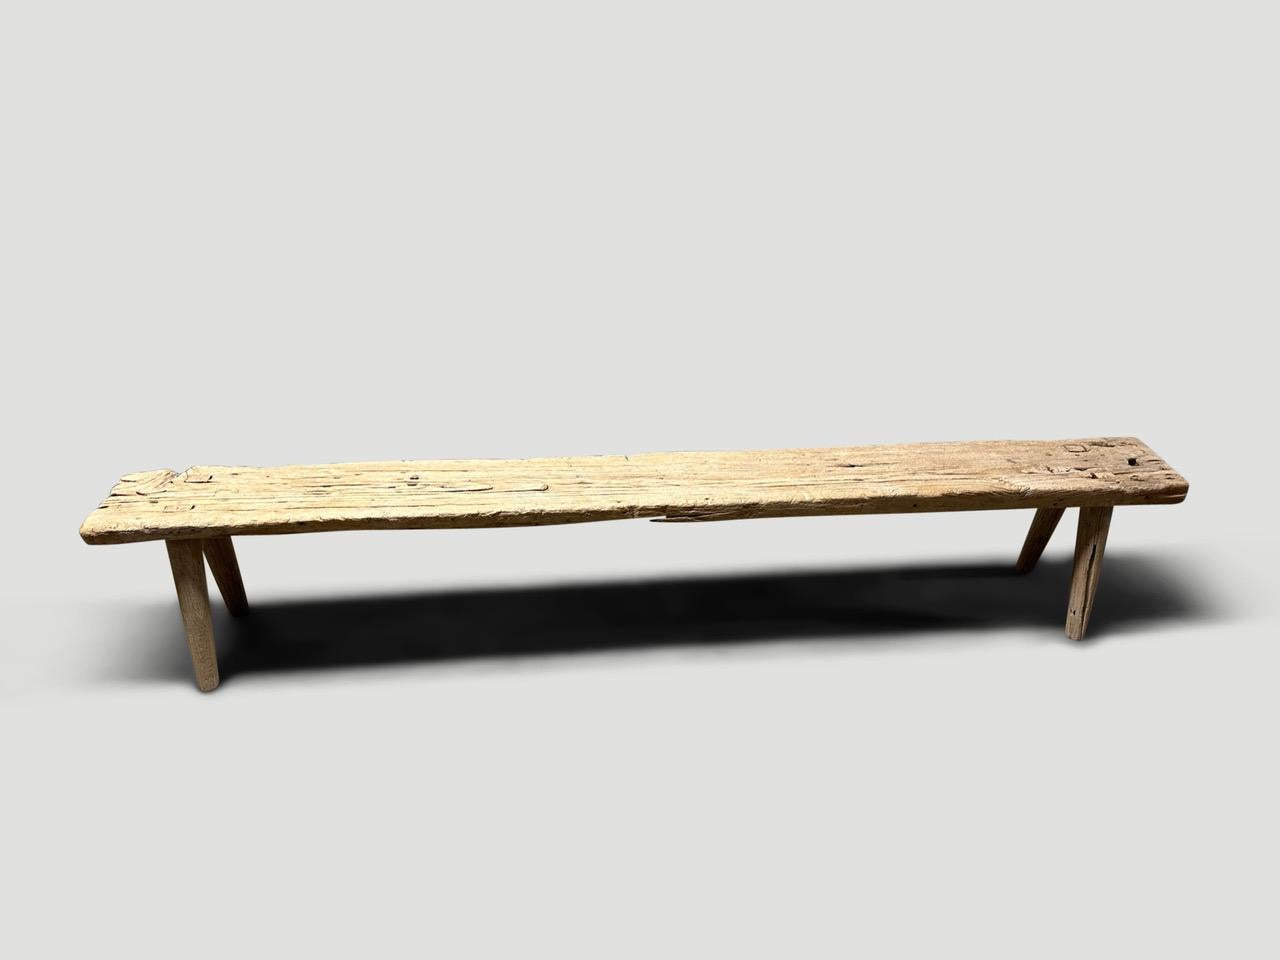 Antique Wabi Sabi teak wood bench celebrating the cracks and crevices and all the other marks that time and loving use have left behind. We added smooth teak minimalist legs to this antique thick slab. It’s all in the details.

This bench was